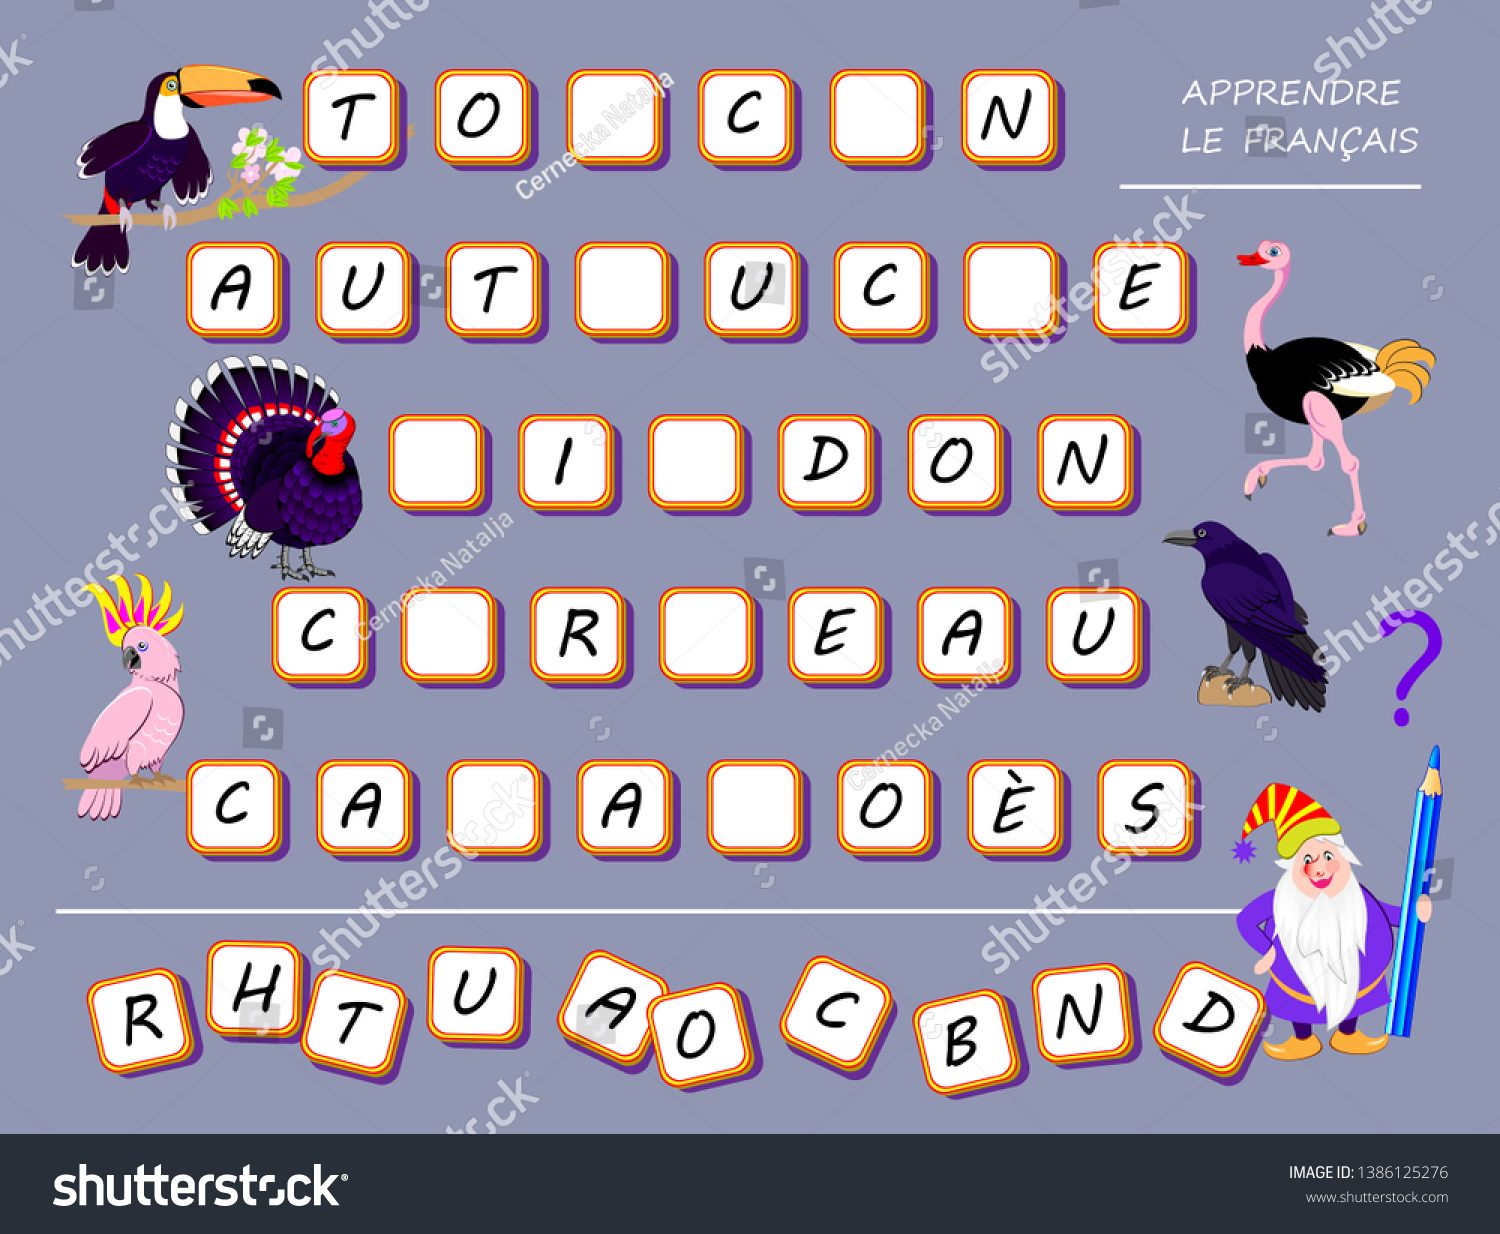 learn french logic puzzle game kids stock vector royalty free 1386125276 shutterstock